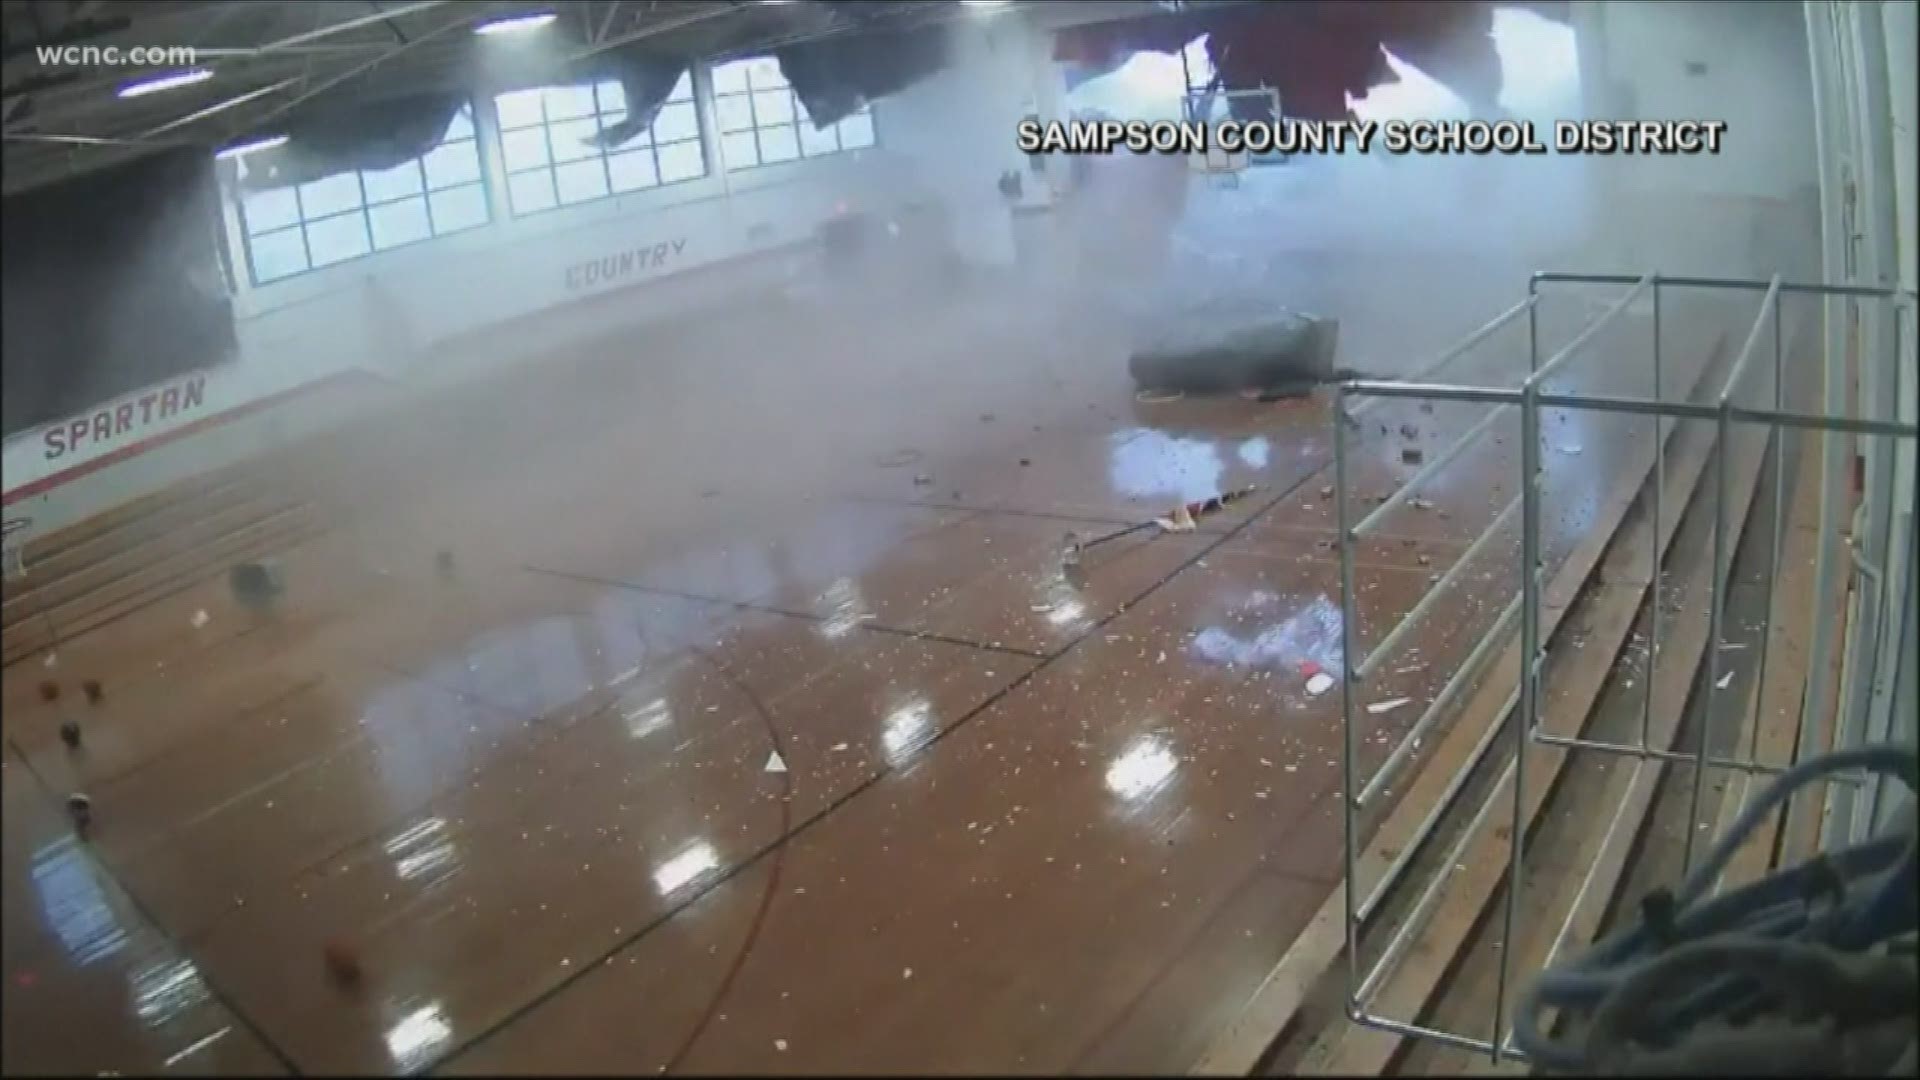 Video shows the moment a roof collapsed on students in a gym in Sampson County. You can see the students on the basketball court when the stage curtain blows upward.